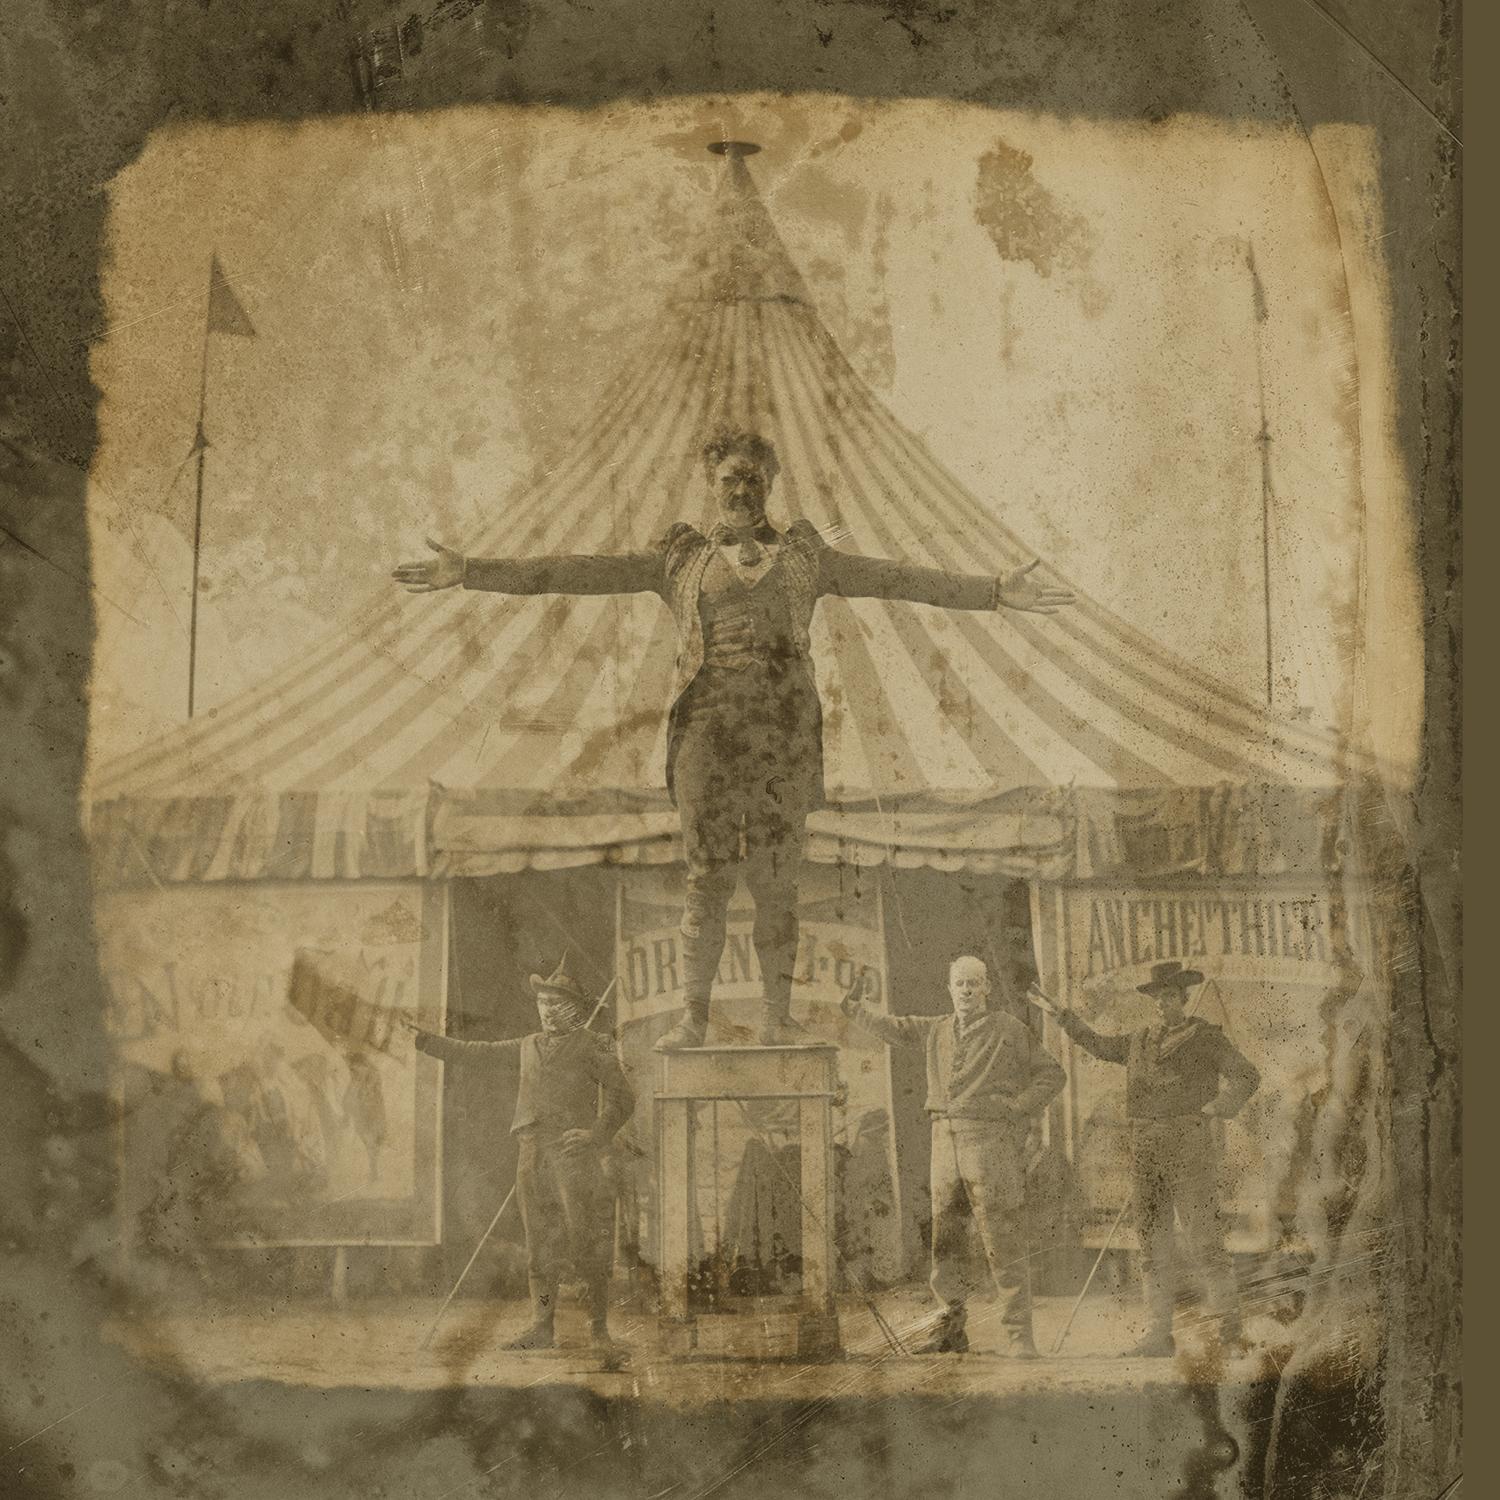 Escape Artist - exotic daguerreotype reproduction Framed - Photograph by FPA Francis Pavy Artist